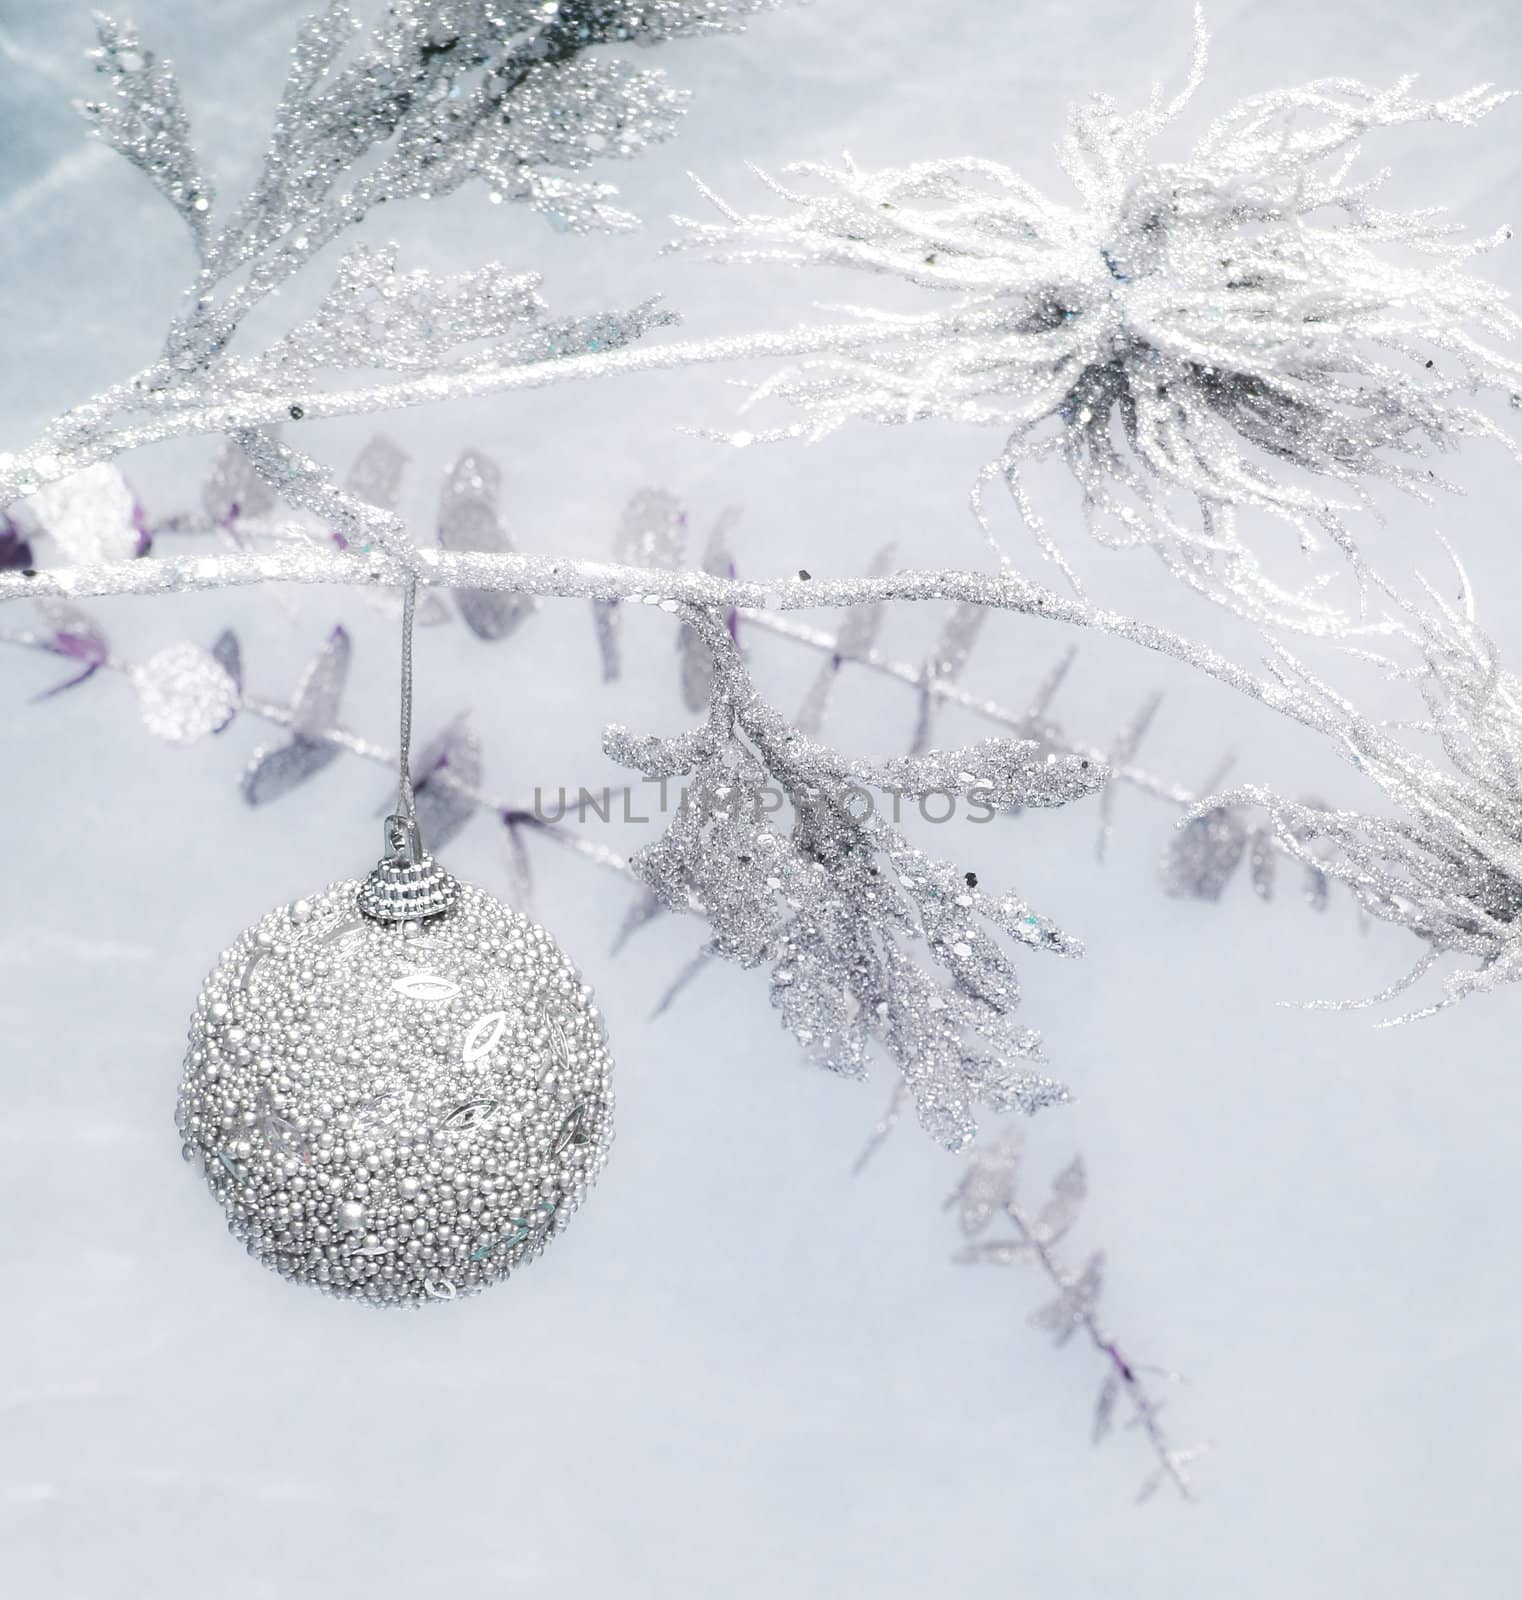 Silver christmas baubles and decorations